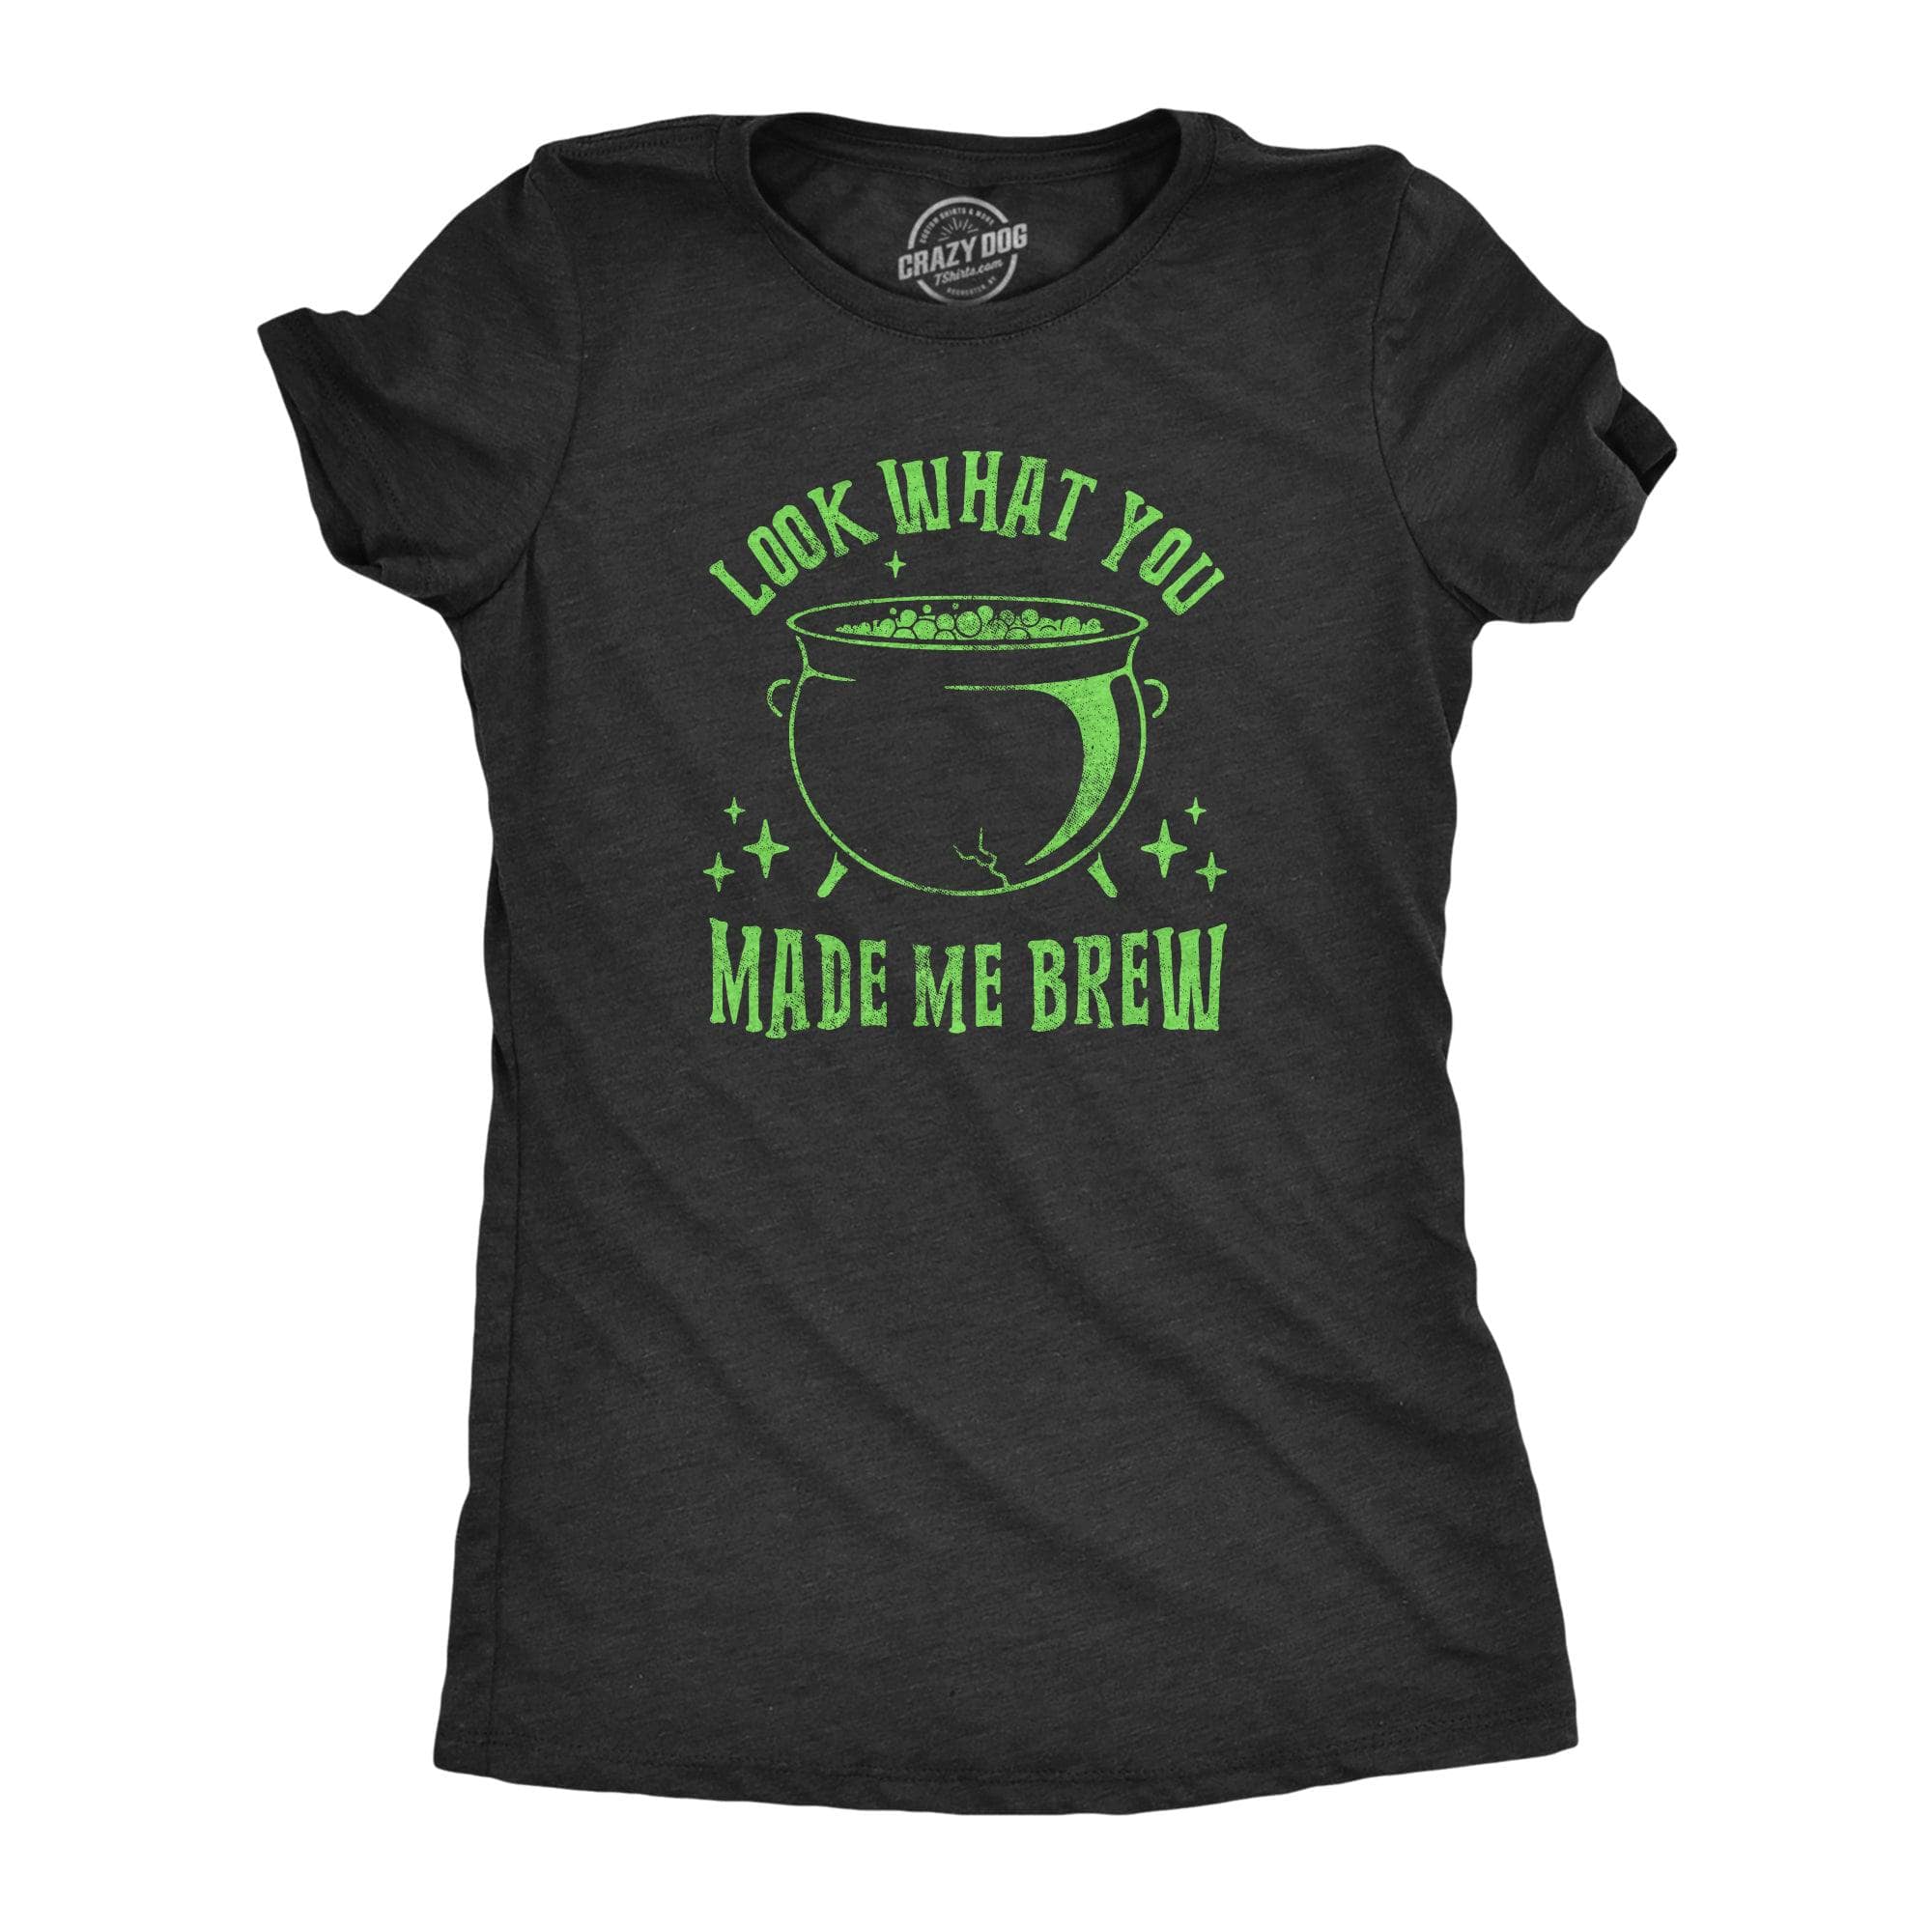 Look What You Made Me Brew Women's Tshirt  -  Crazy Dog T-Shirts